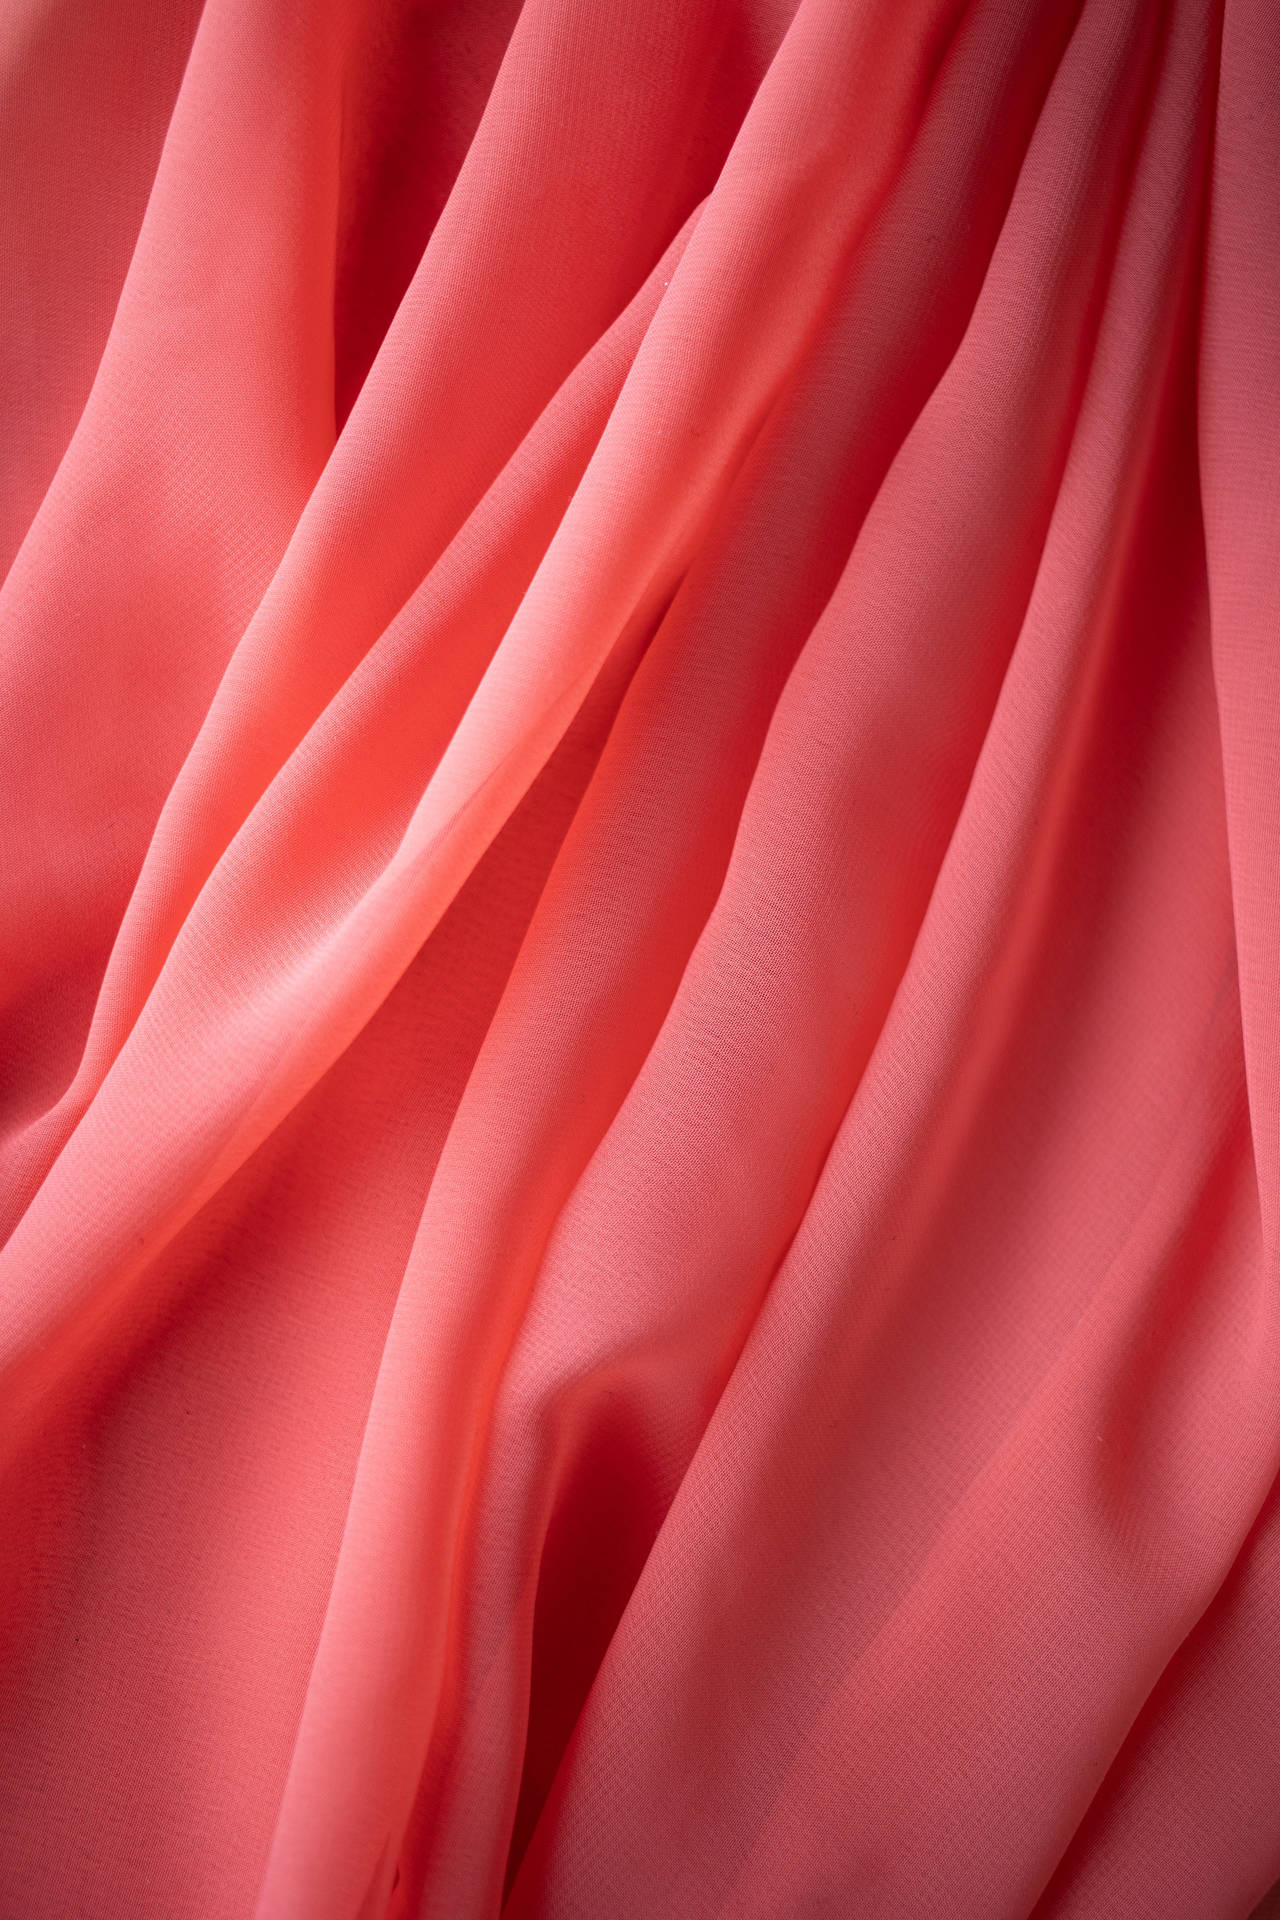 Solid Pastel Color Red Silk Background